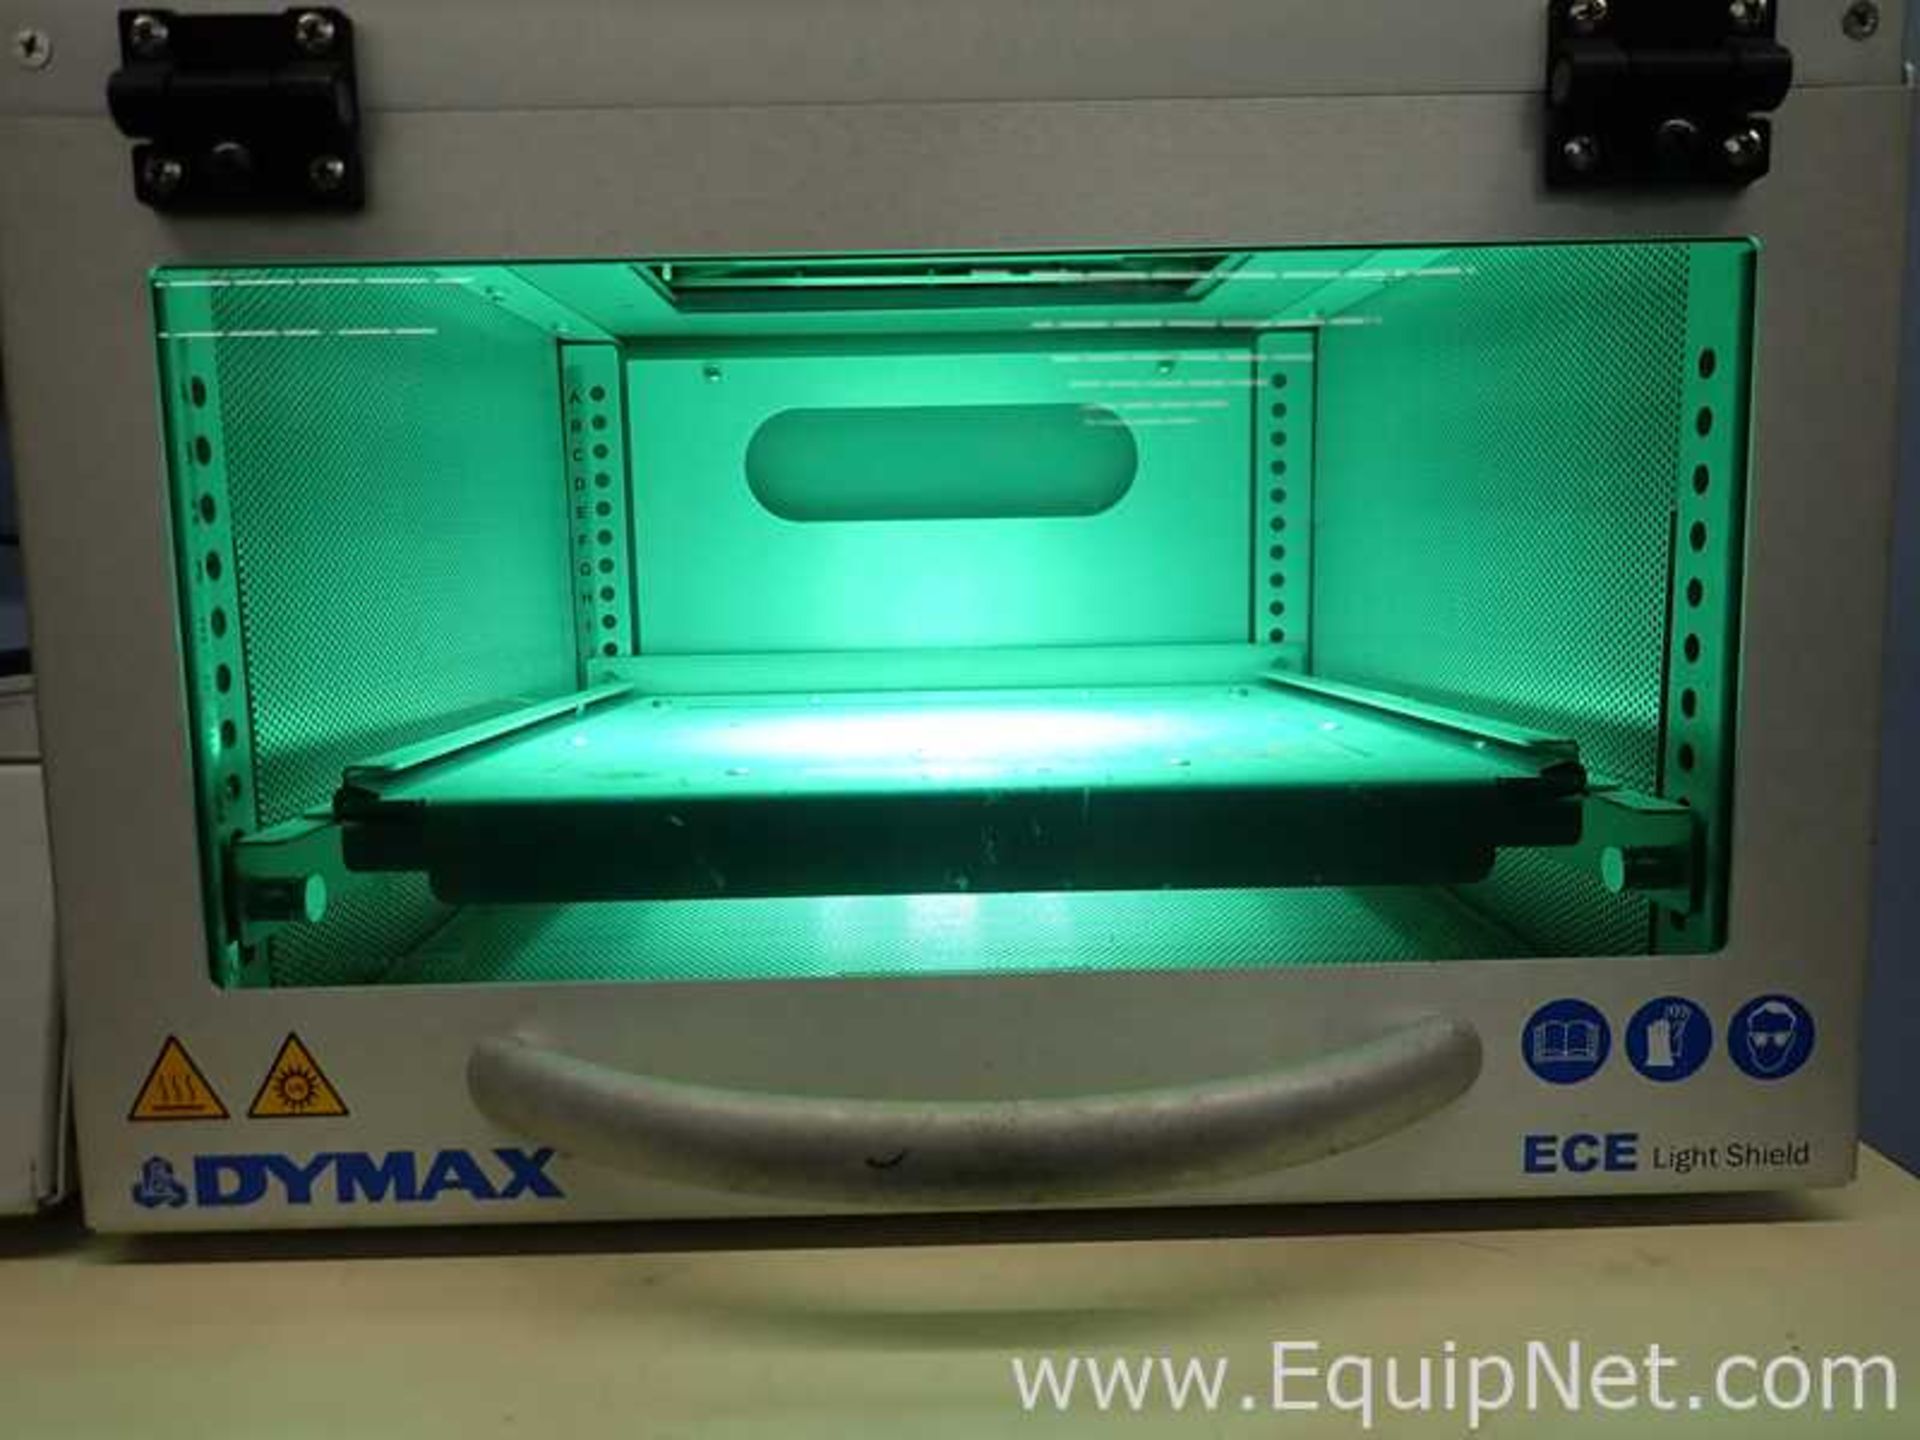 Dymax ECE Series UV Light-Curing Flood Lamp Systems - Image 6 of 31